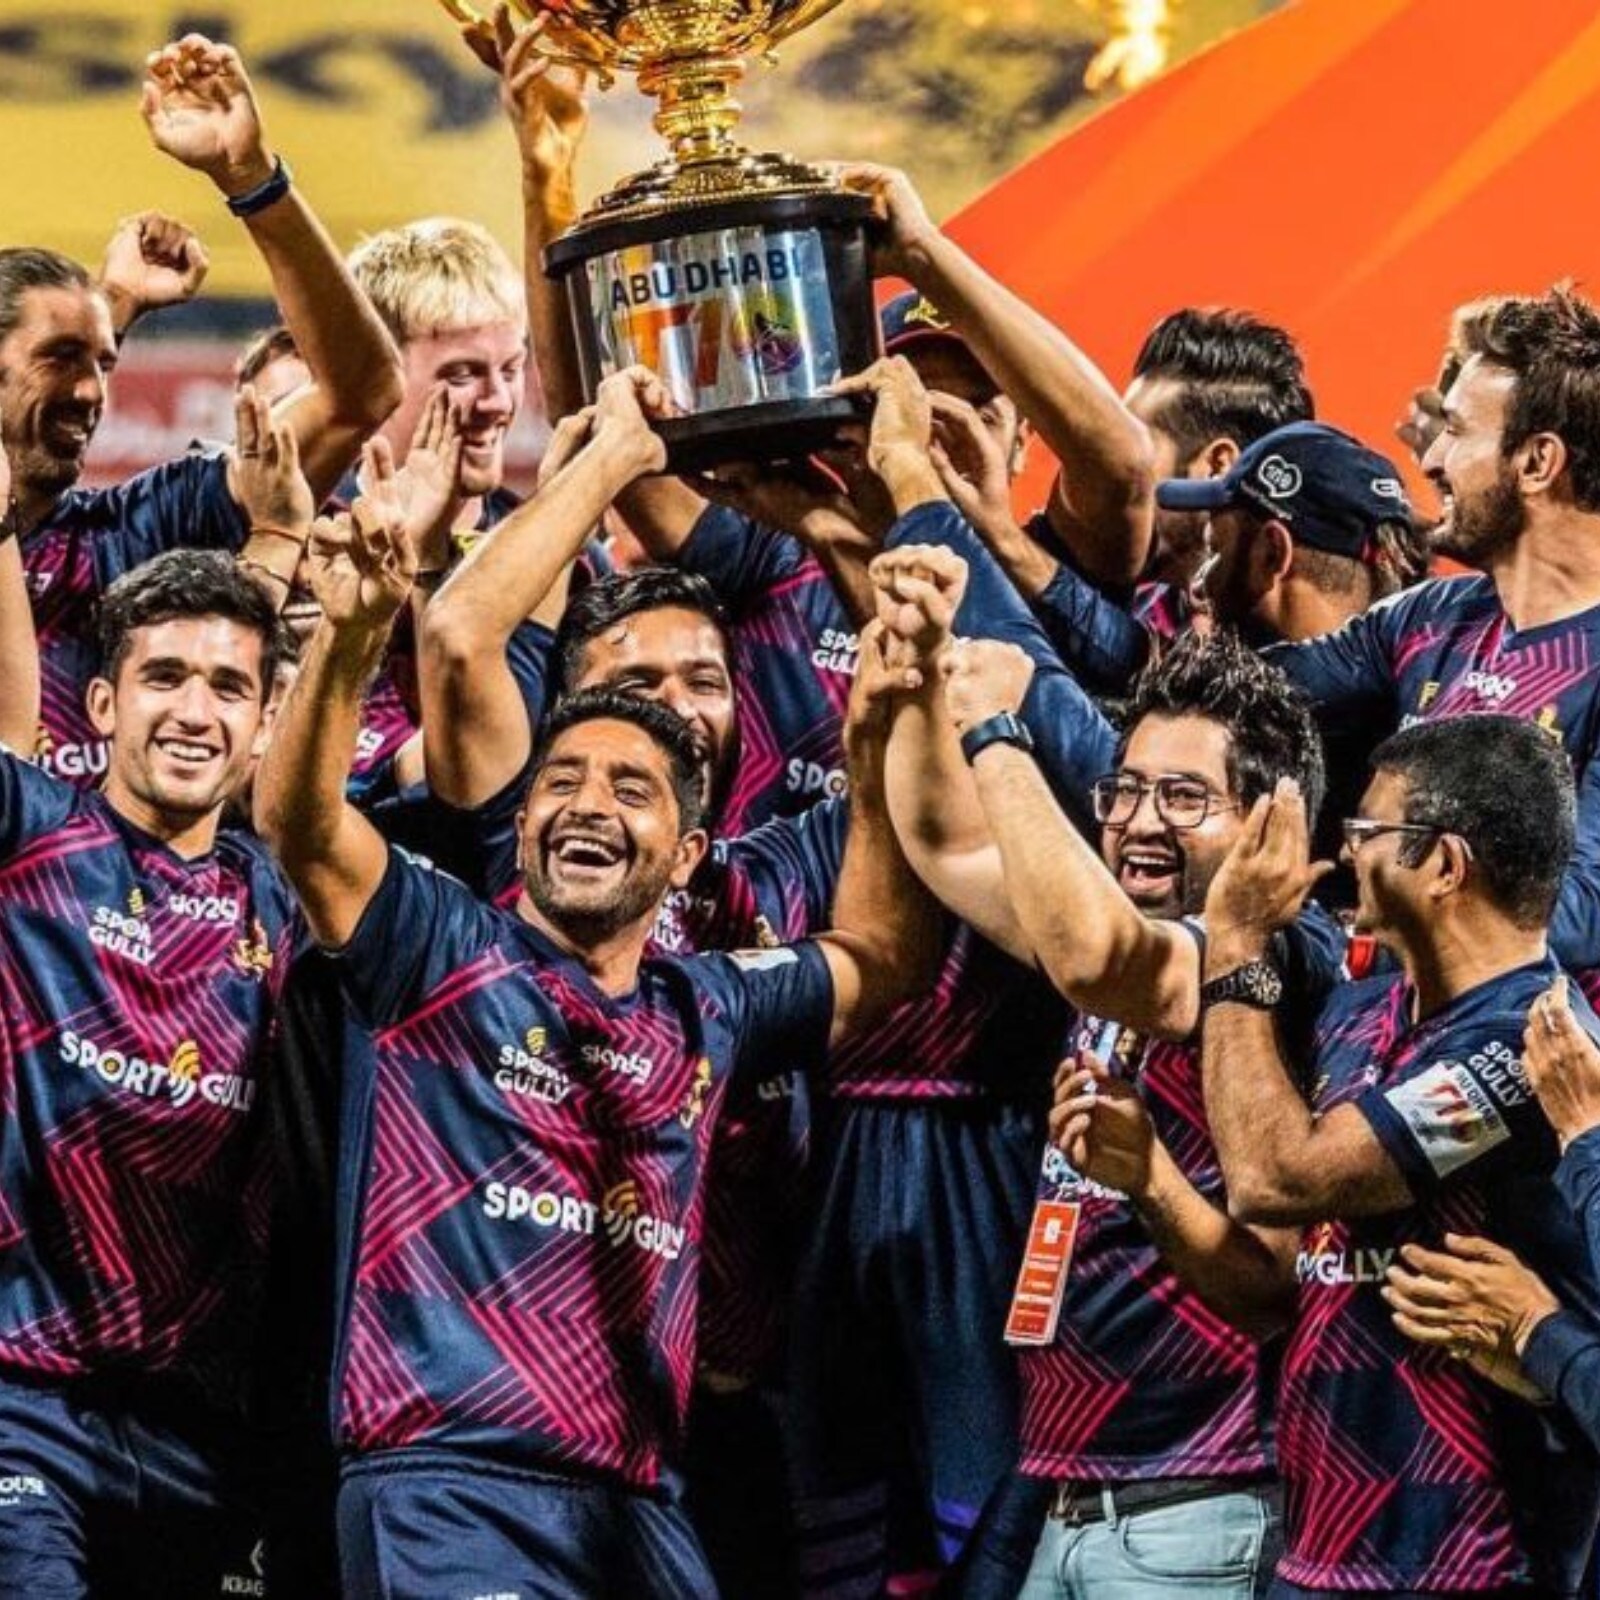 Abu Dhabi T10 League 2022 Check out the full schedule and live-streaming details